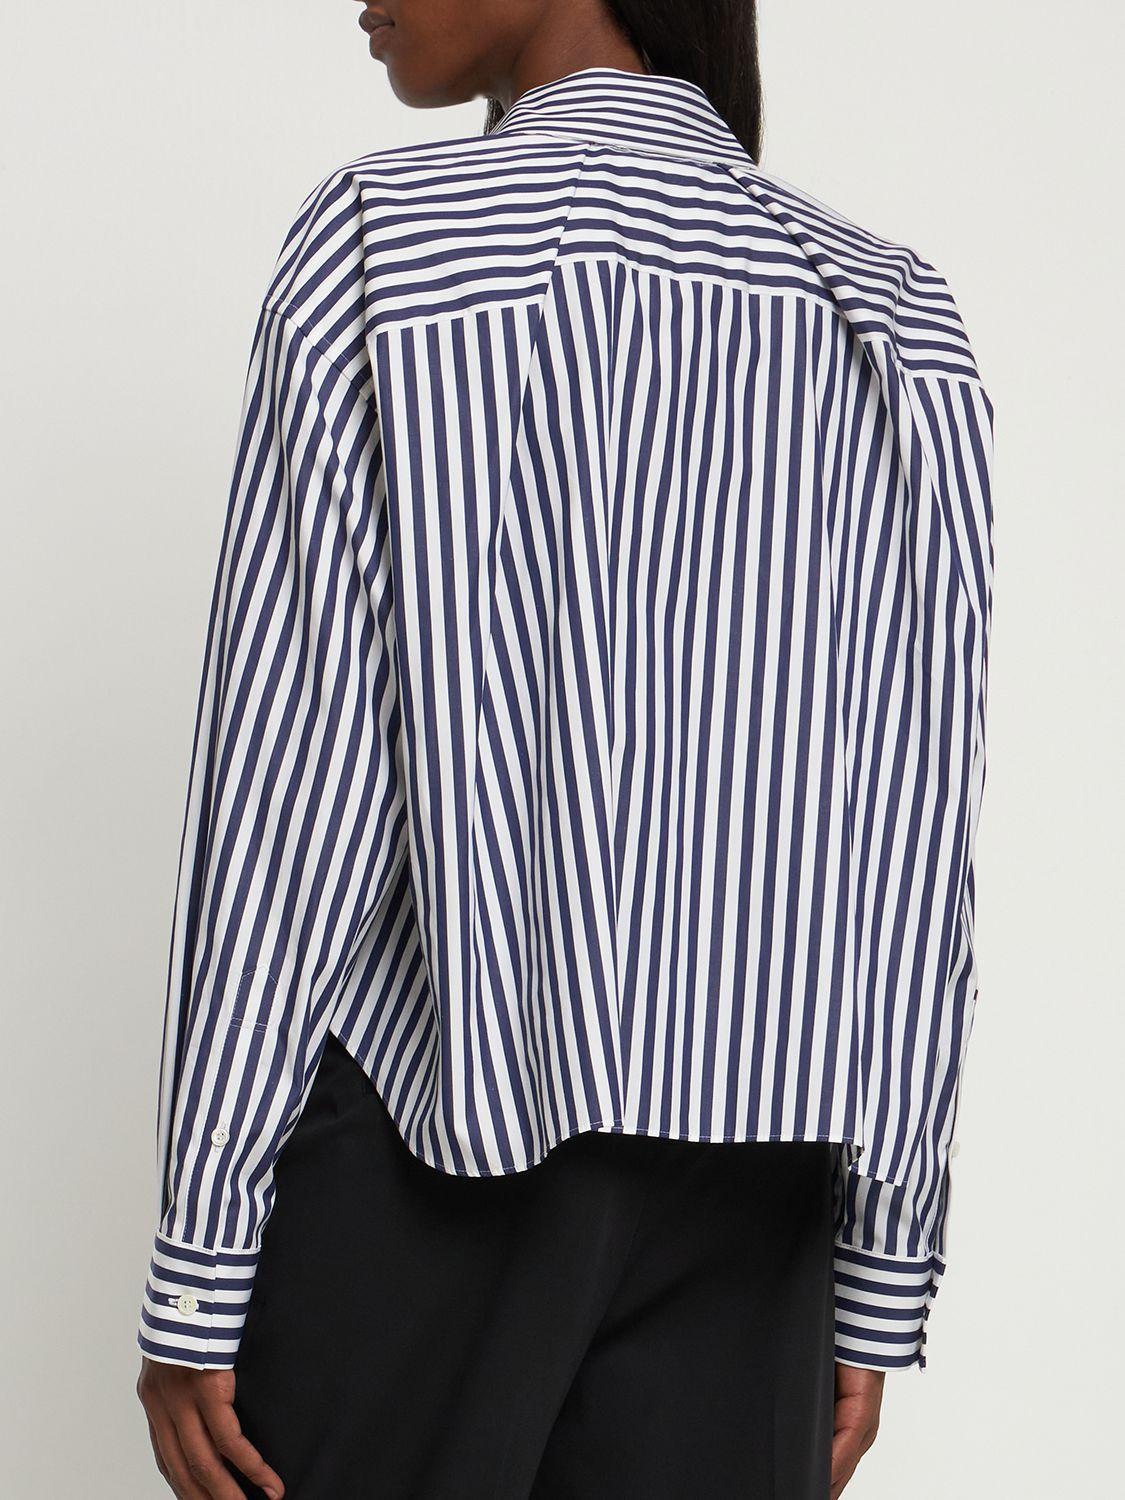 CROPPED SHIRT IN STRIPED COTTON - WHITE / NAVY / BLACK